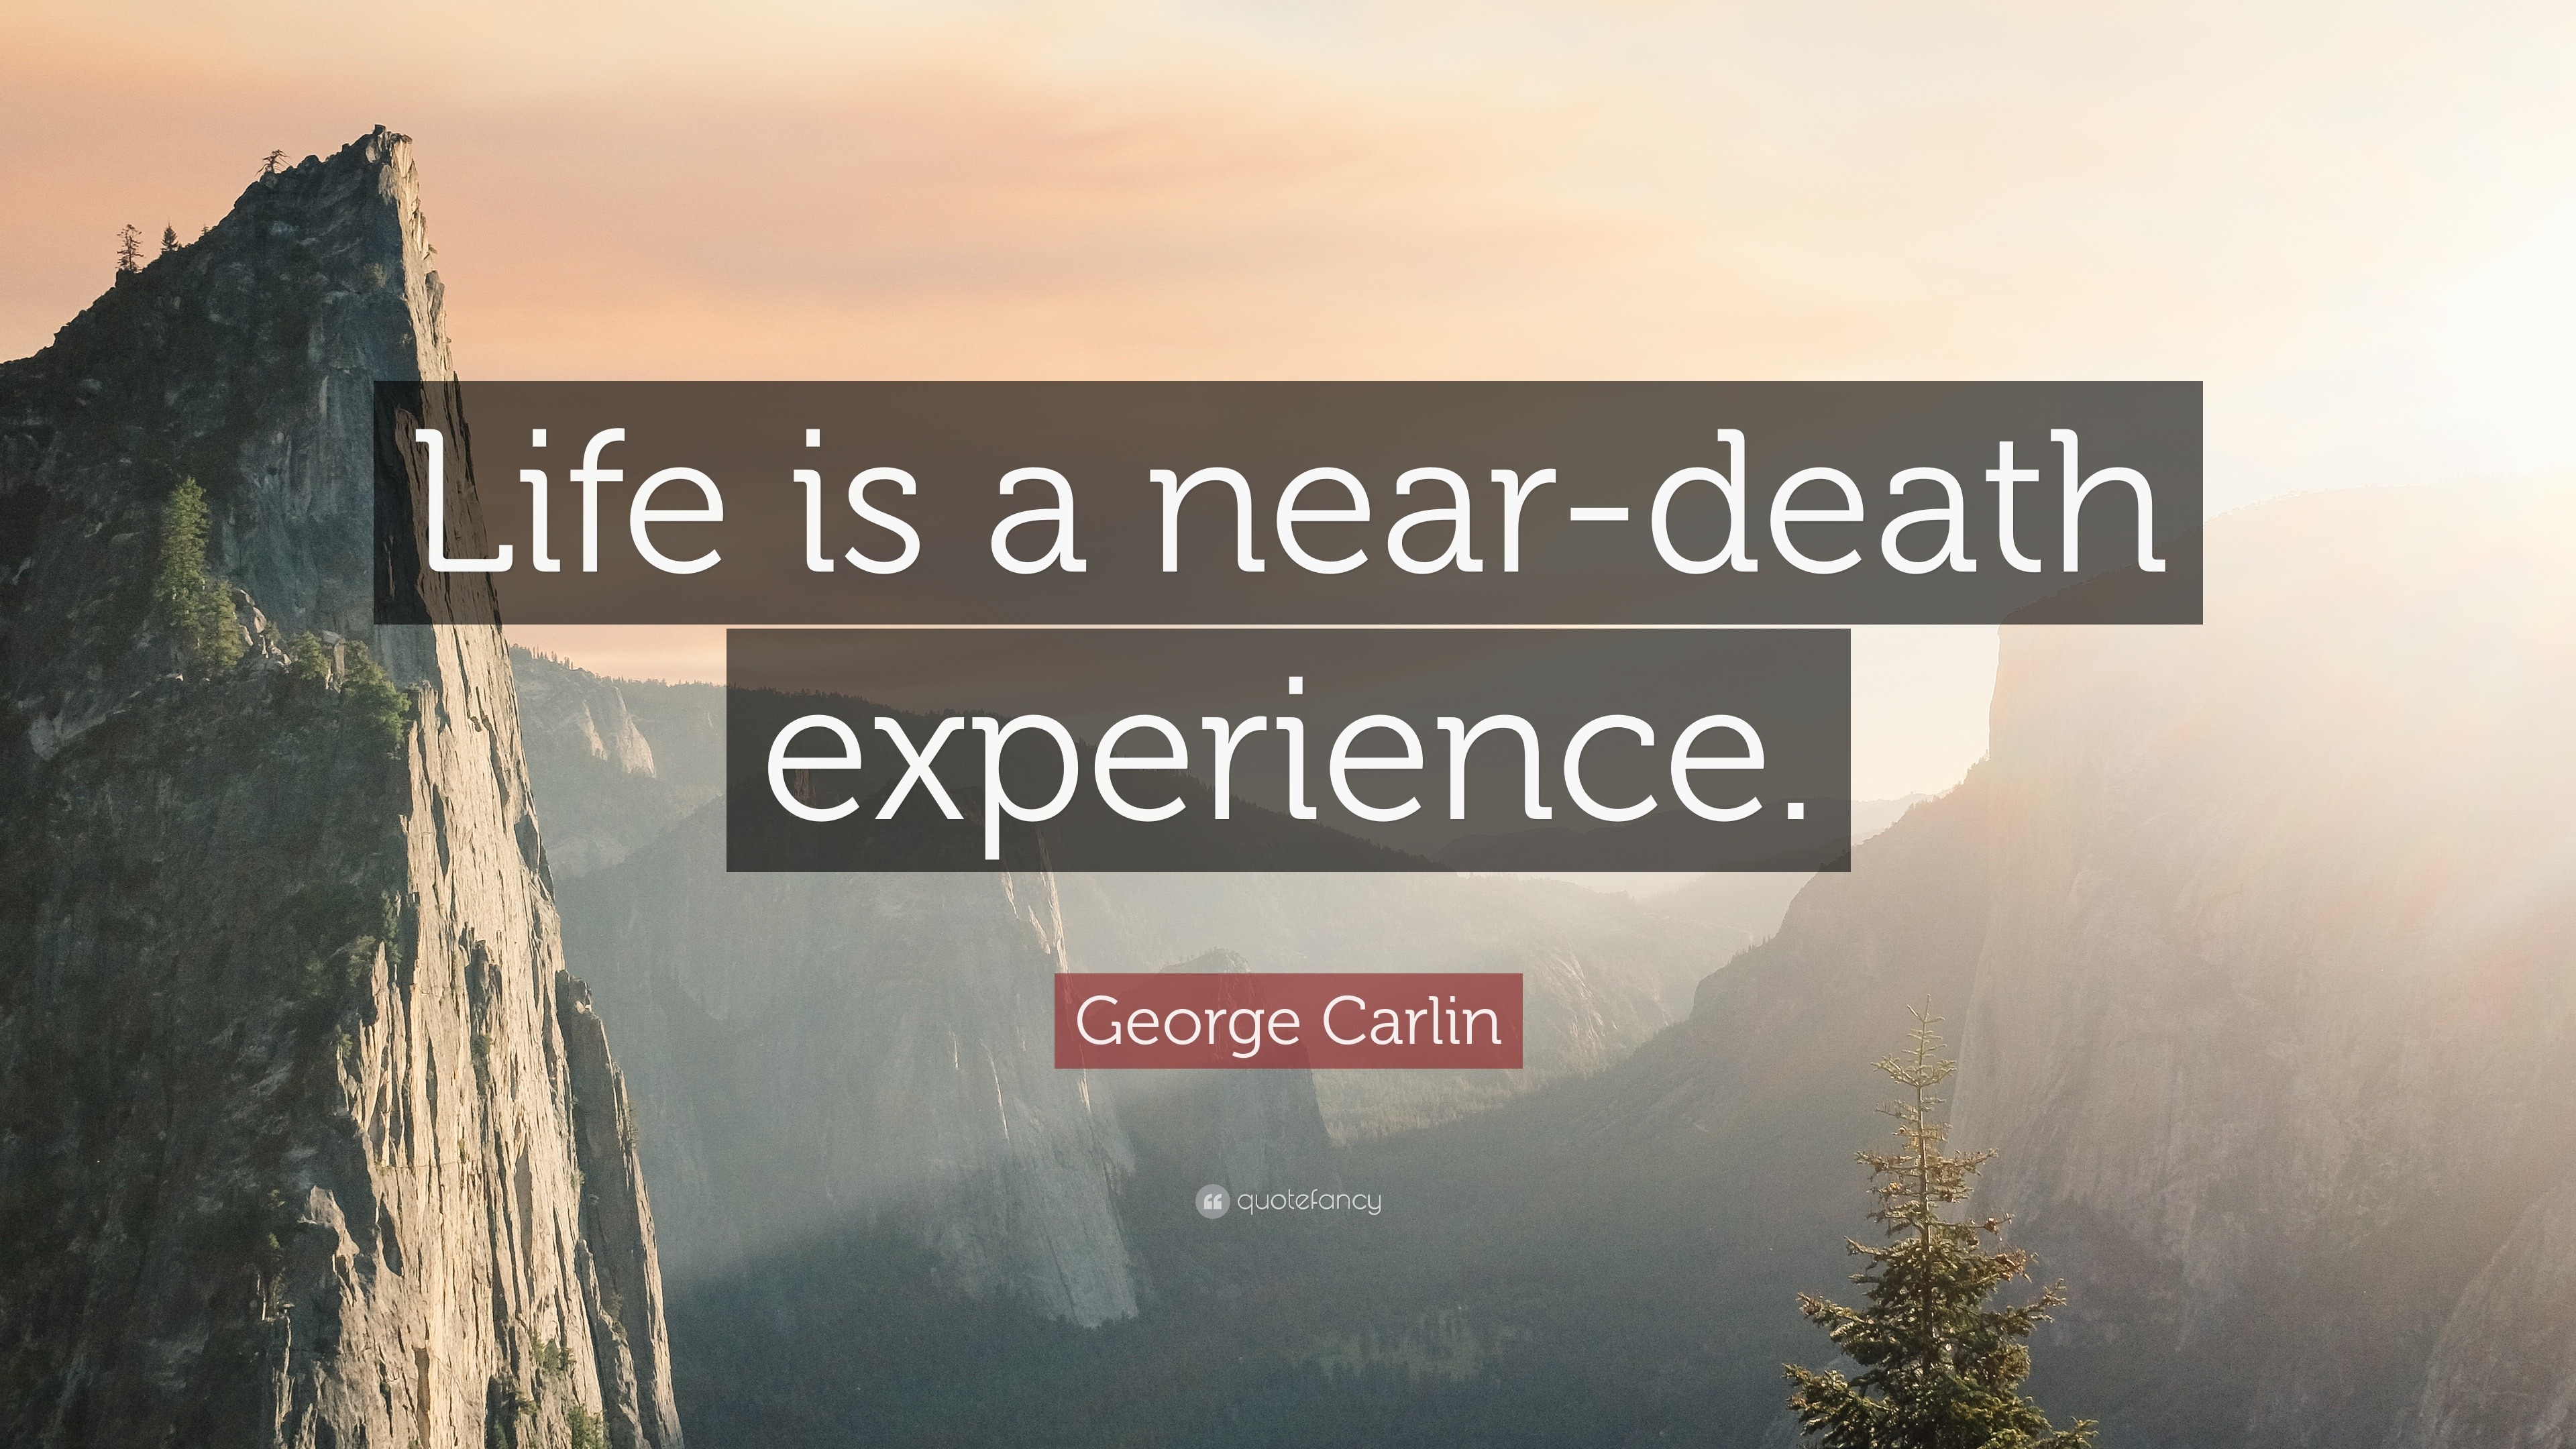 George Carlin Quote: “Life is a near-death experience.”